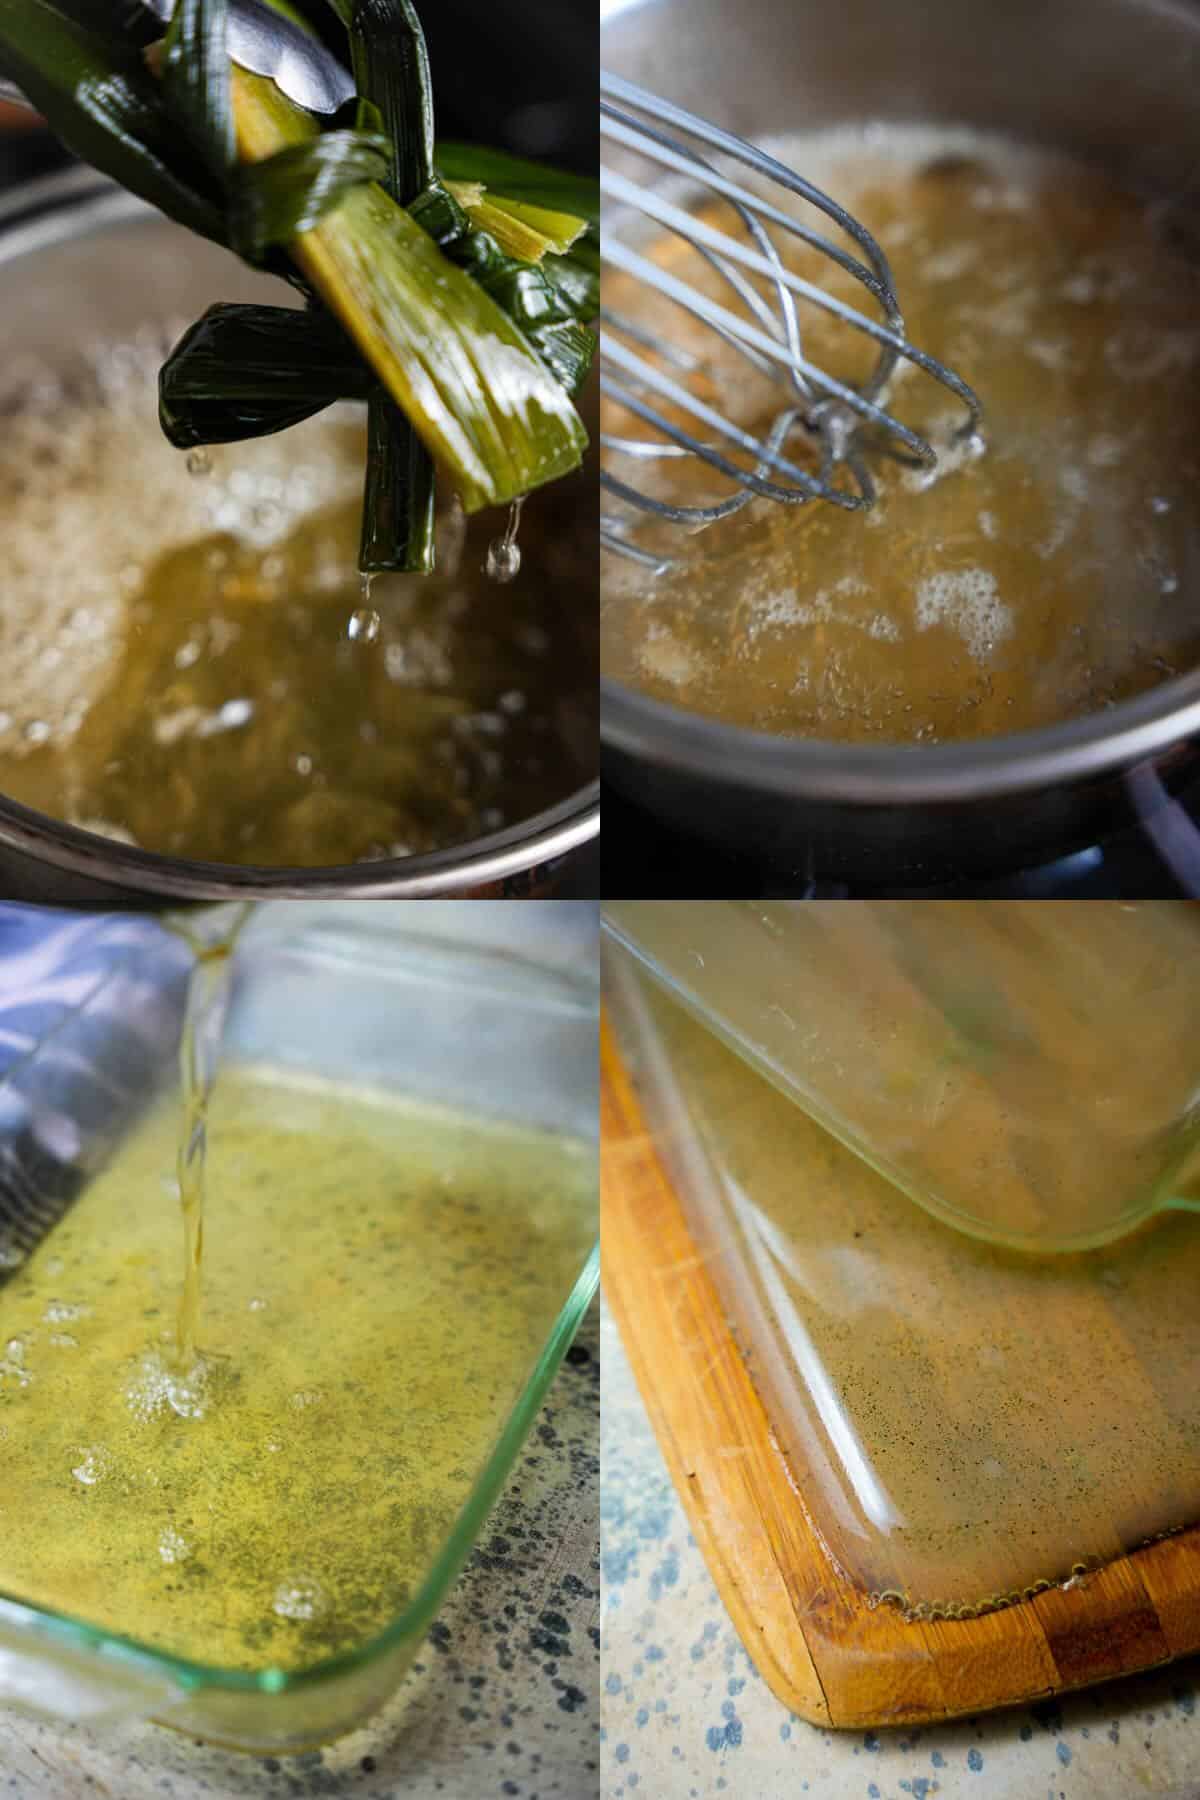 A series of photos documenting the step-by-step process of making a chè ba pandan jelly.